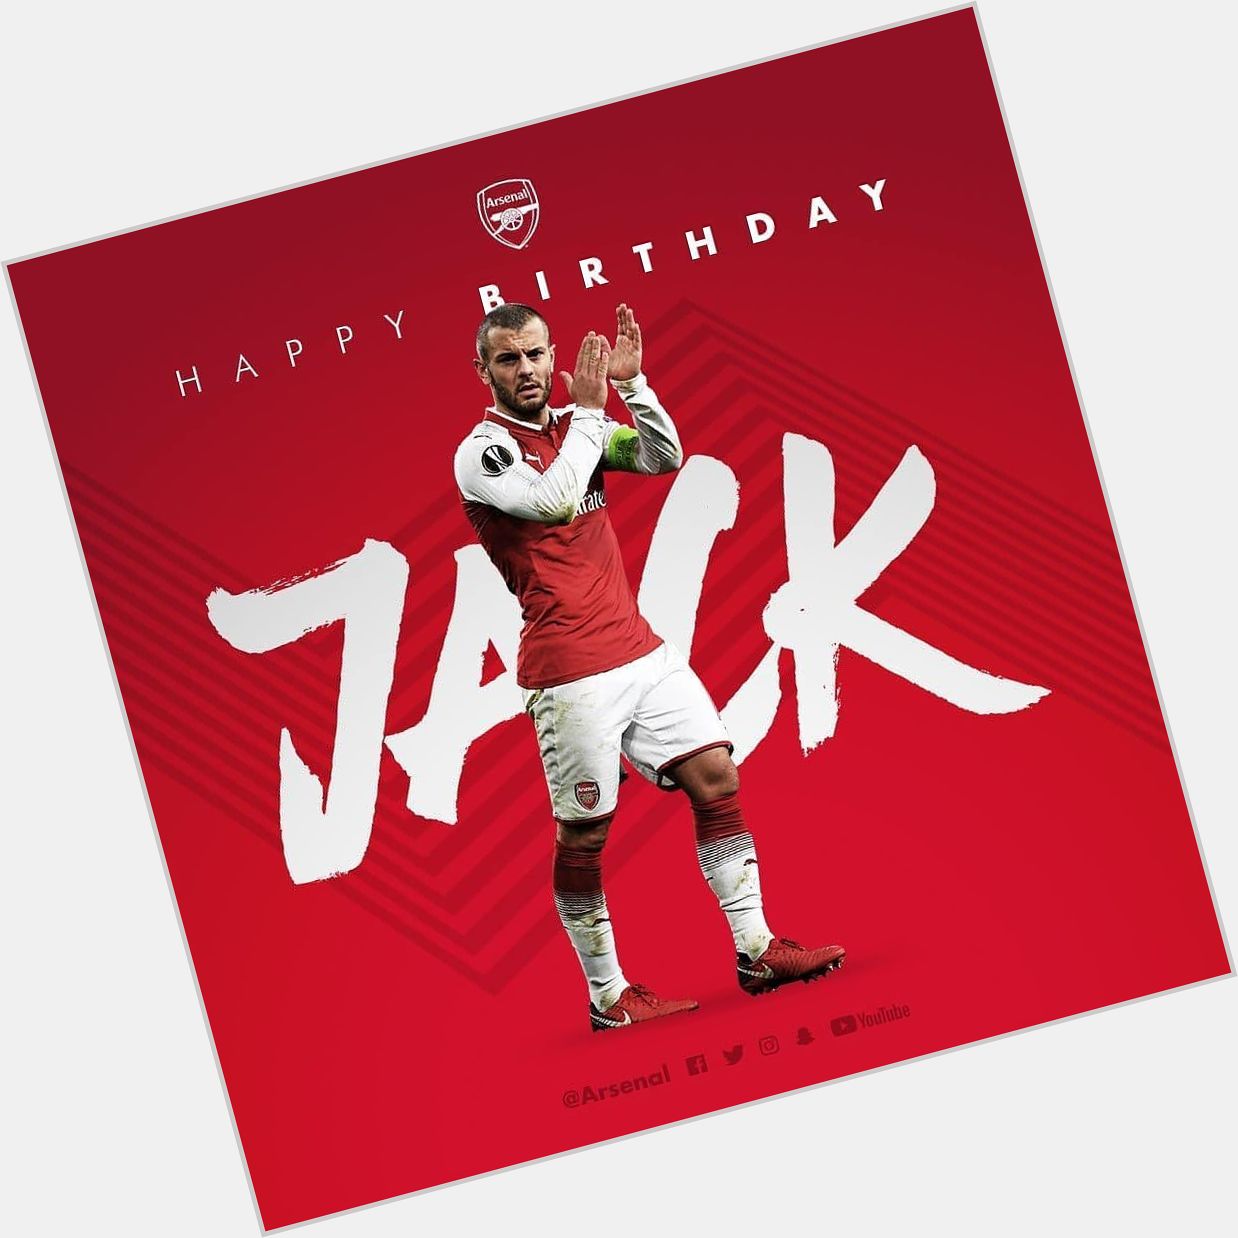 Happy birthday to Arsenal midfielder Jack Wilshere who turns 26 years old today. -AUS  